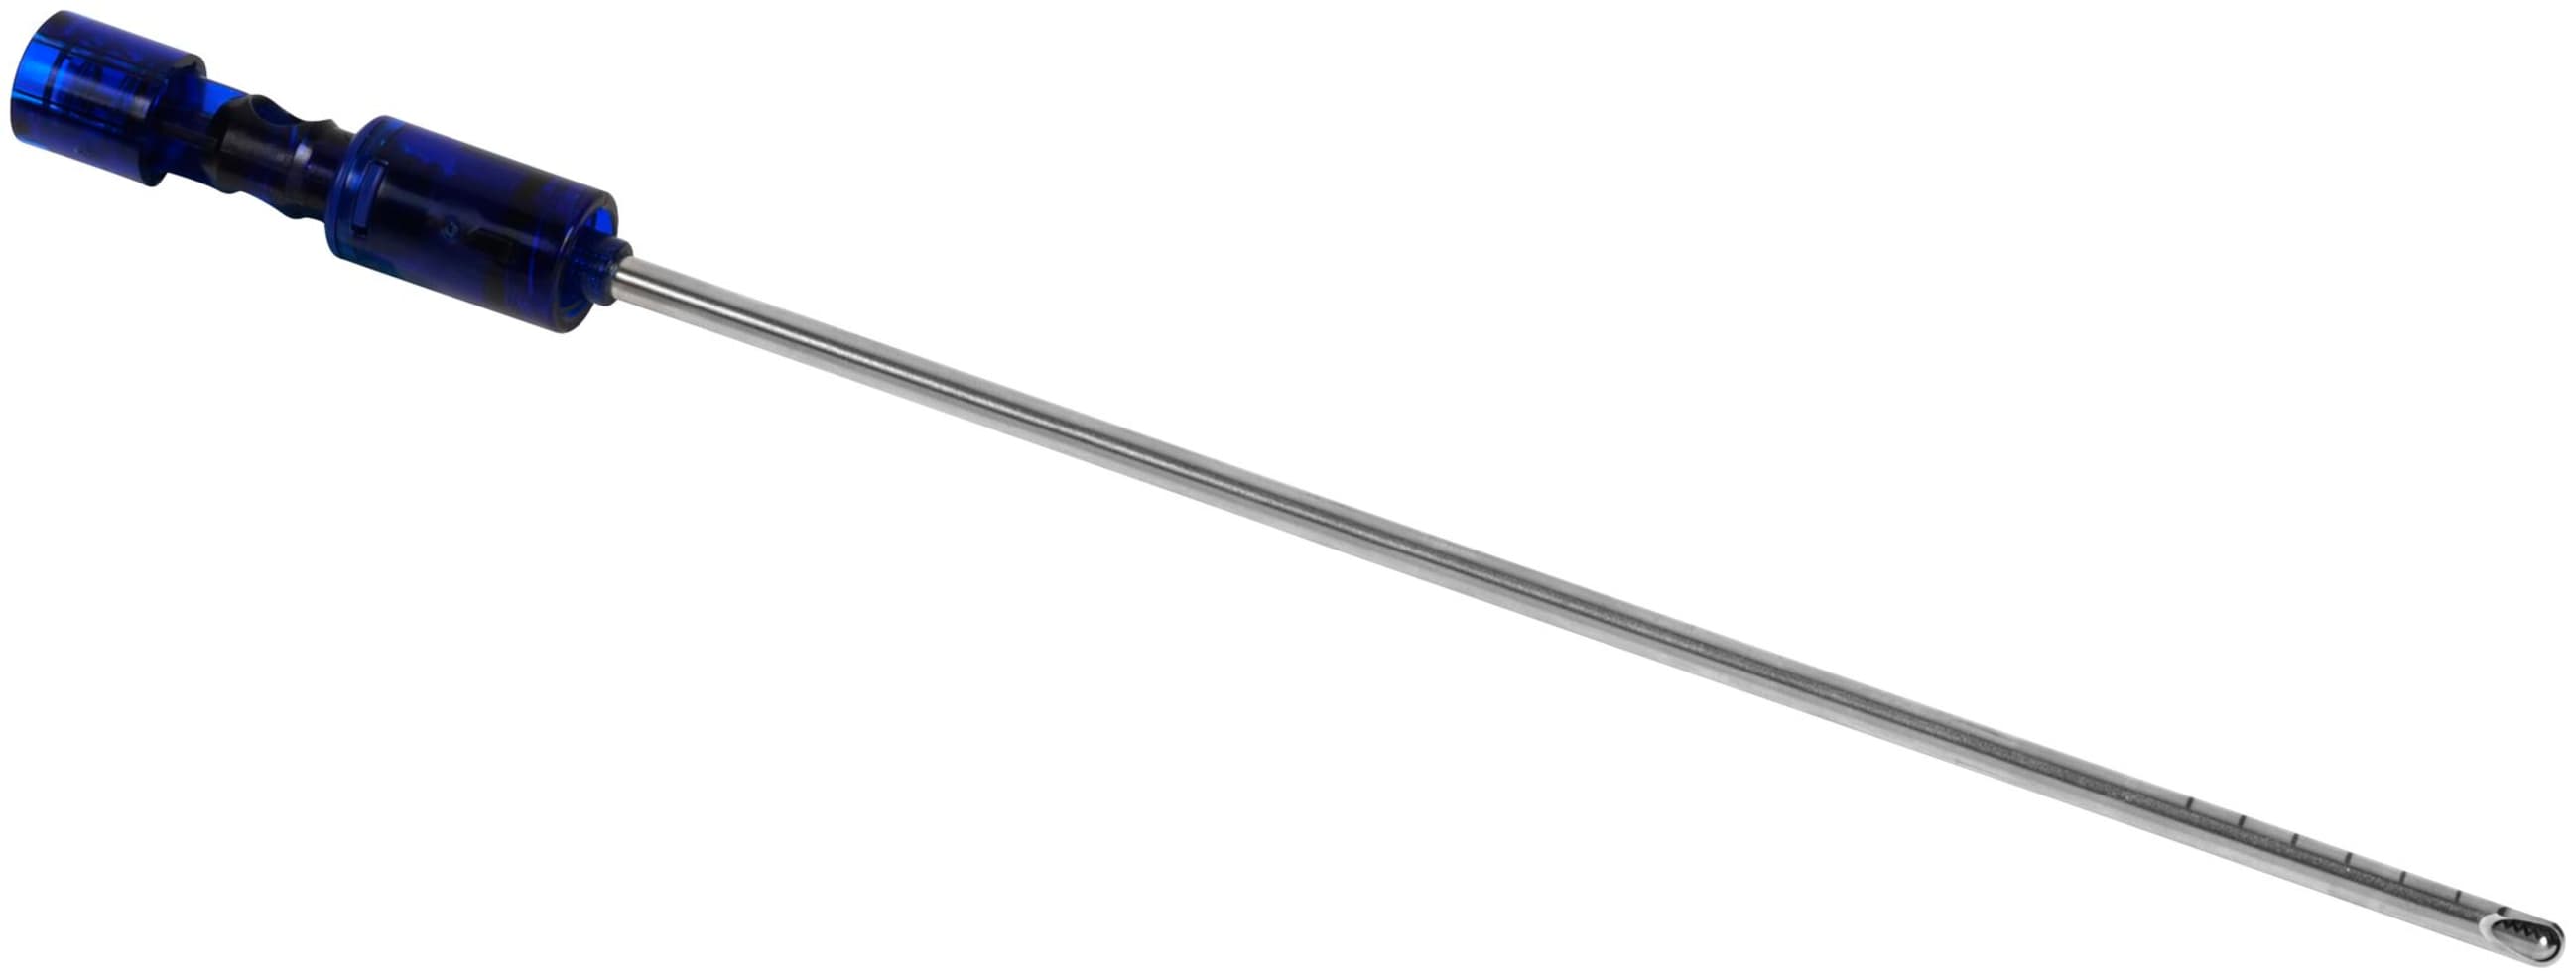 Dissector, HL, 4.2 mm x 19.0 cm, steril, SU